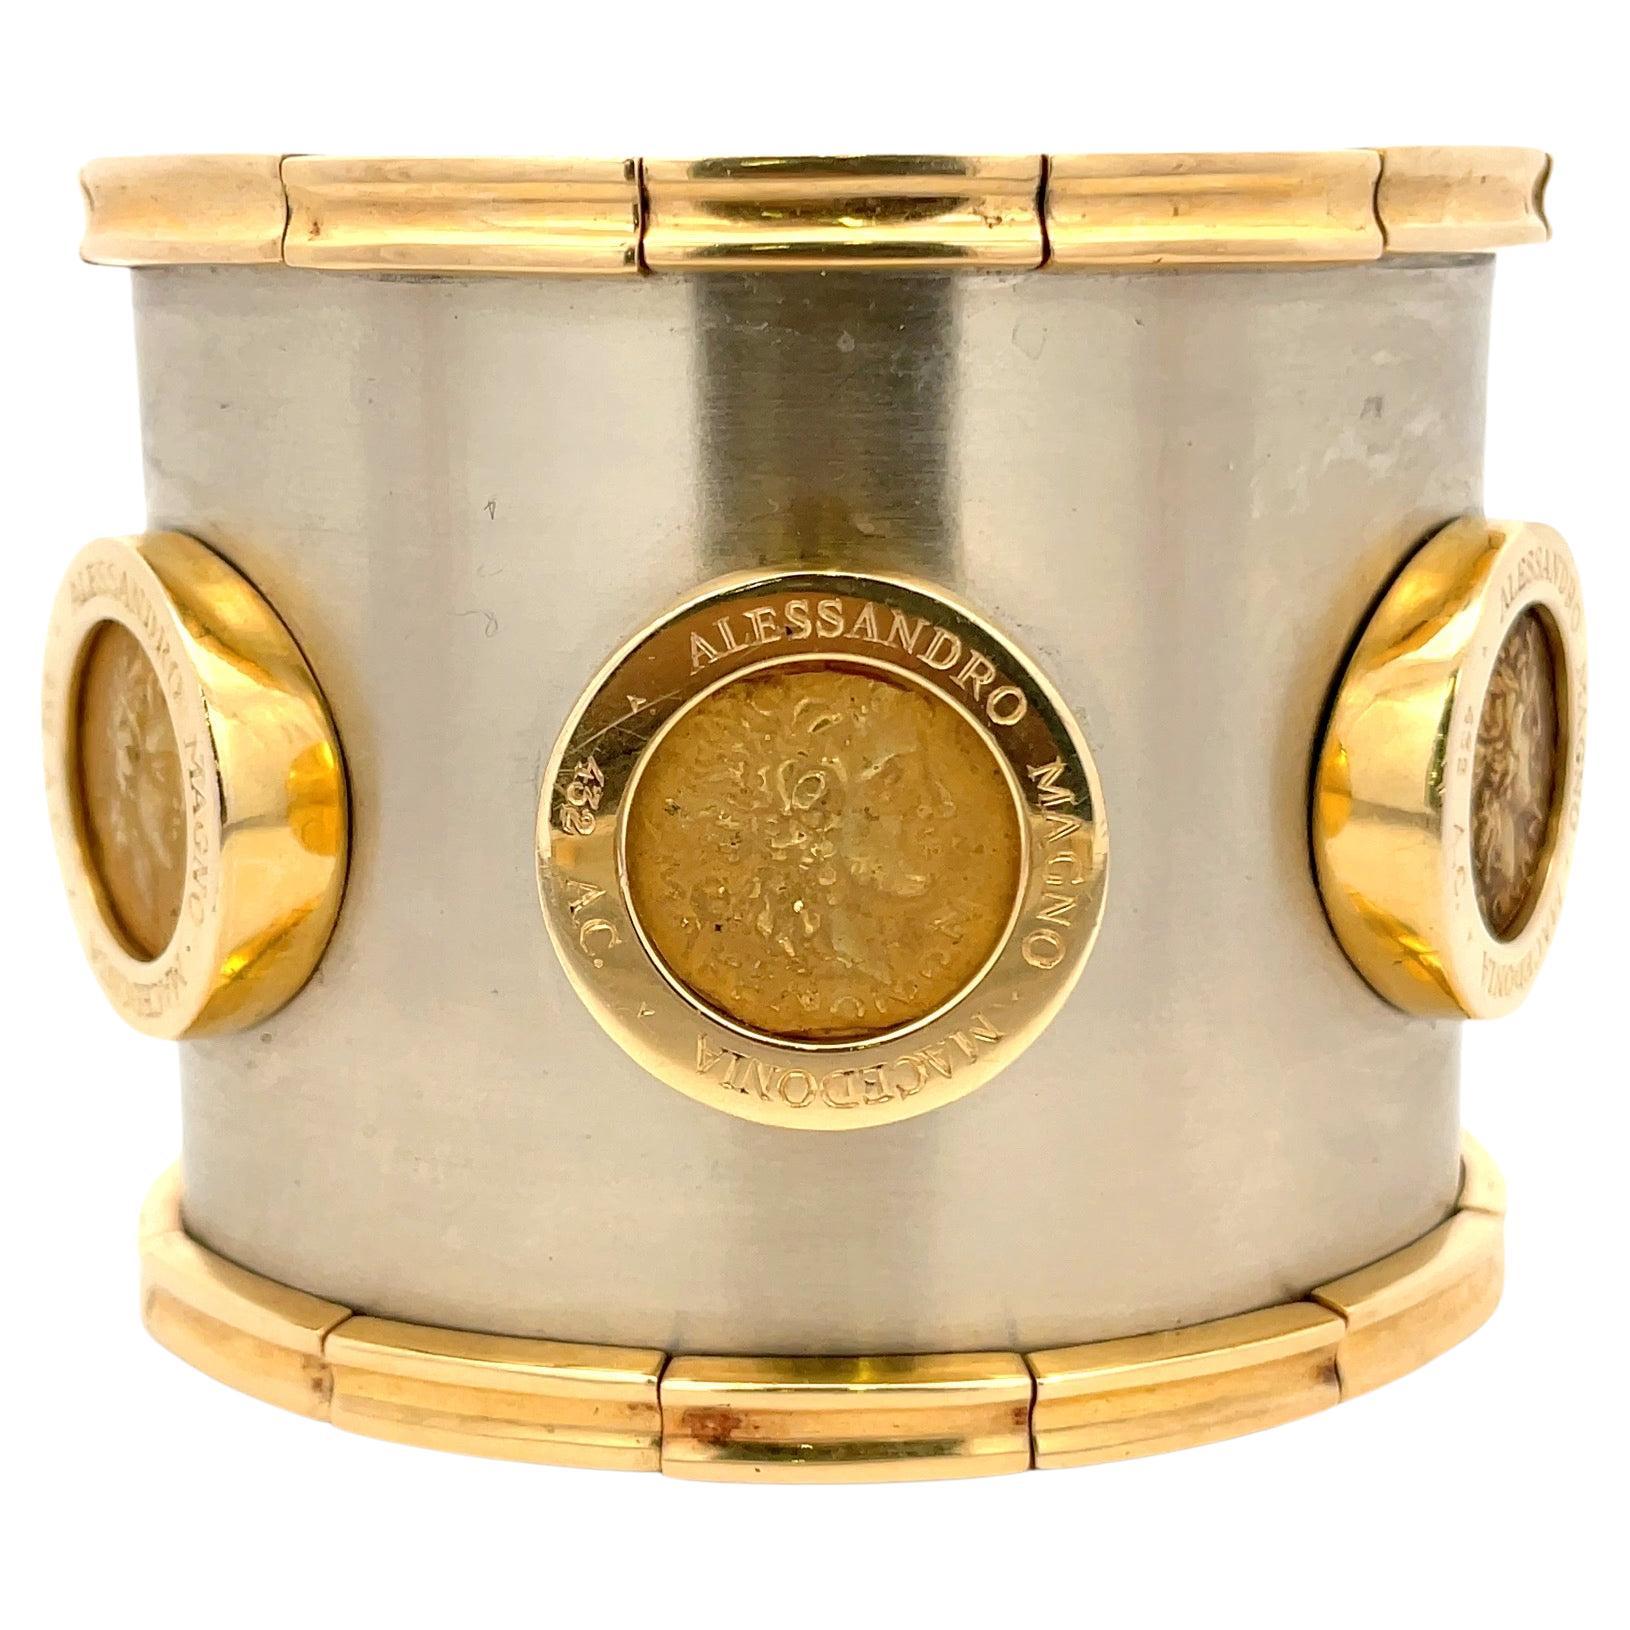 Very wide cuff bracelet featuring three coins inscribed Alessandro Magno Macedonia 432 AC on a brushed white gold bangle with yellow gold bar accents, 18 Karat, 202 Grams. 
100% Showstopper & a great conversation piece. 
DM for more videos and